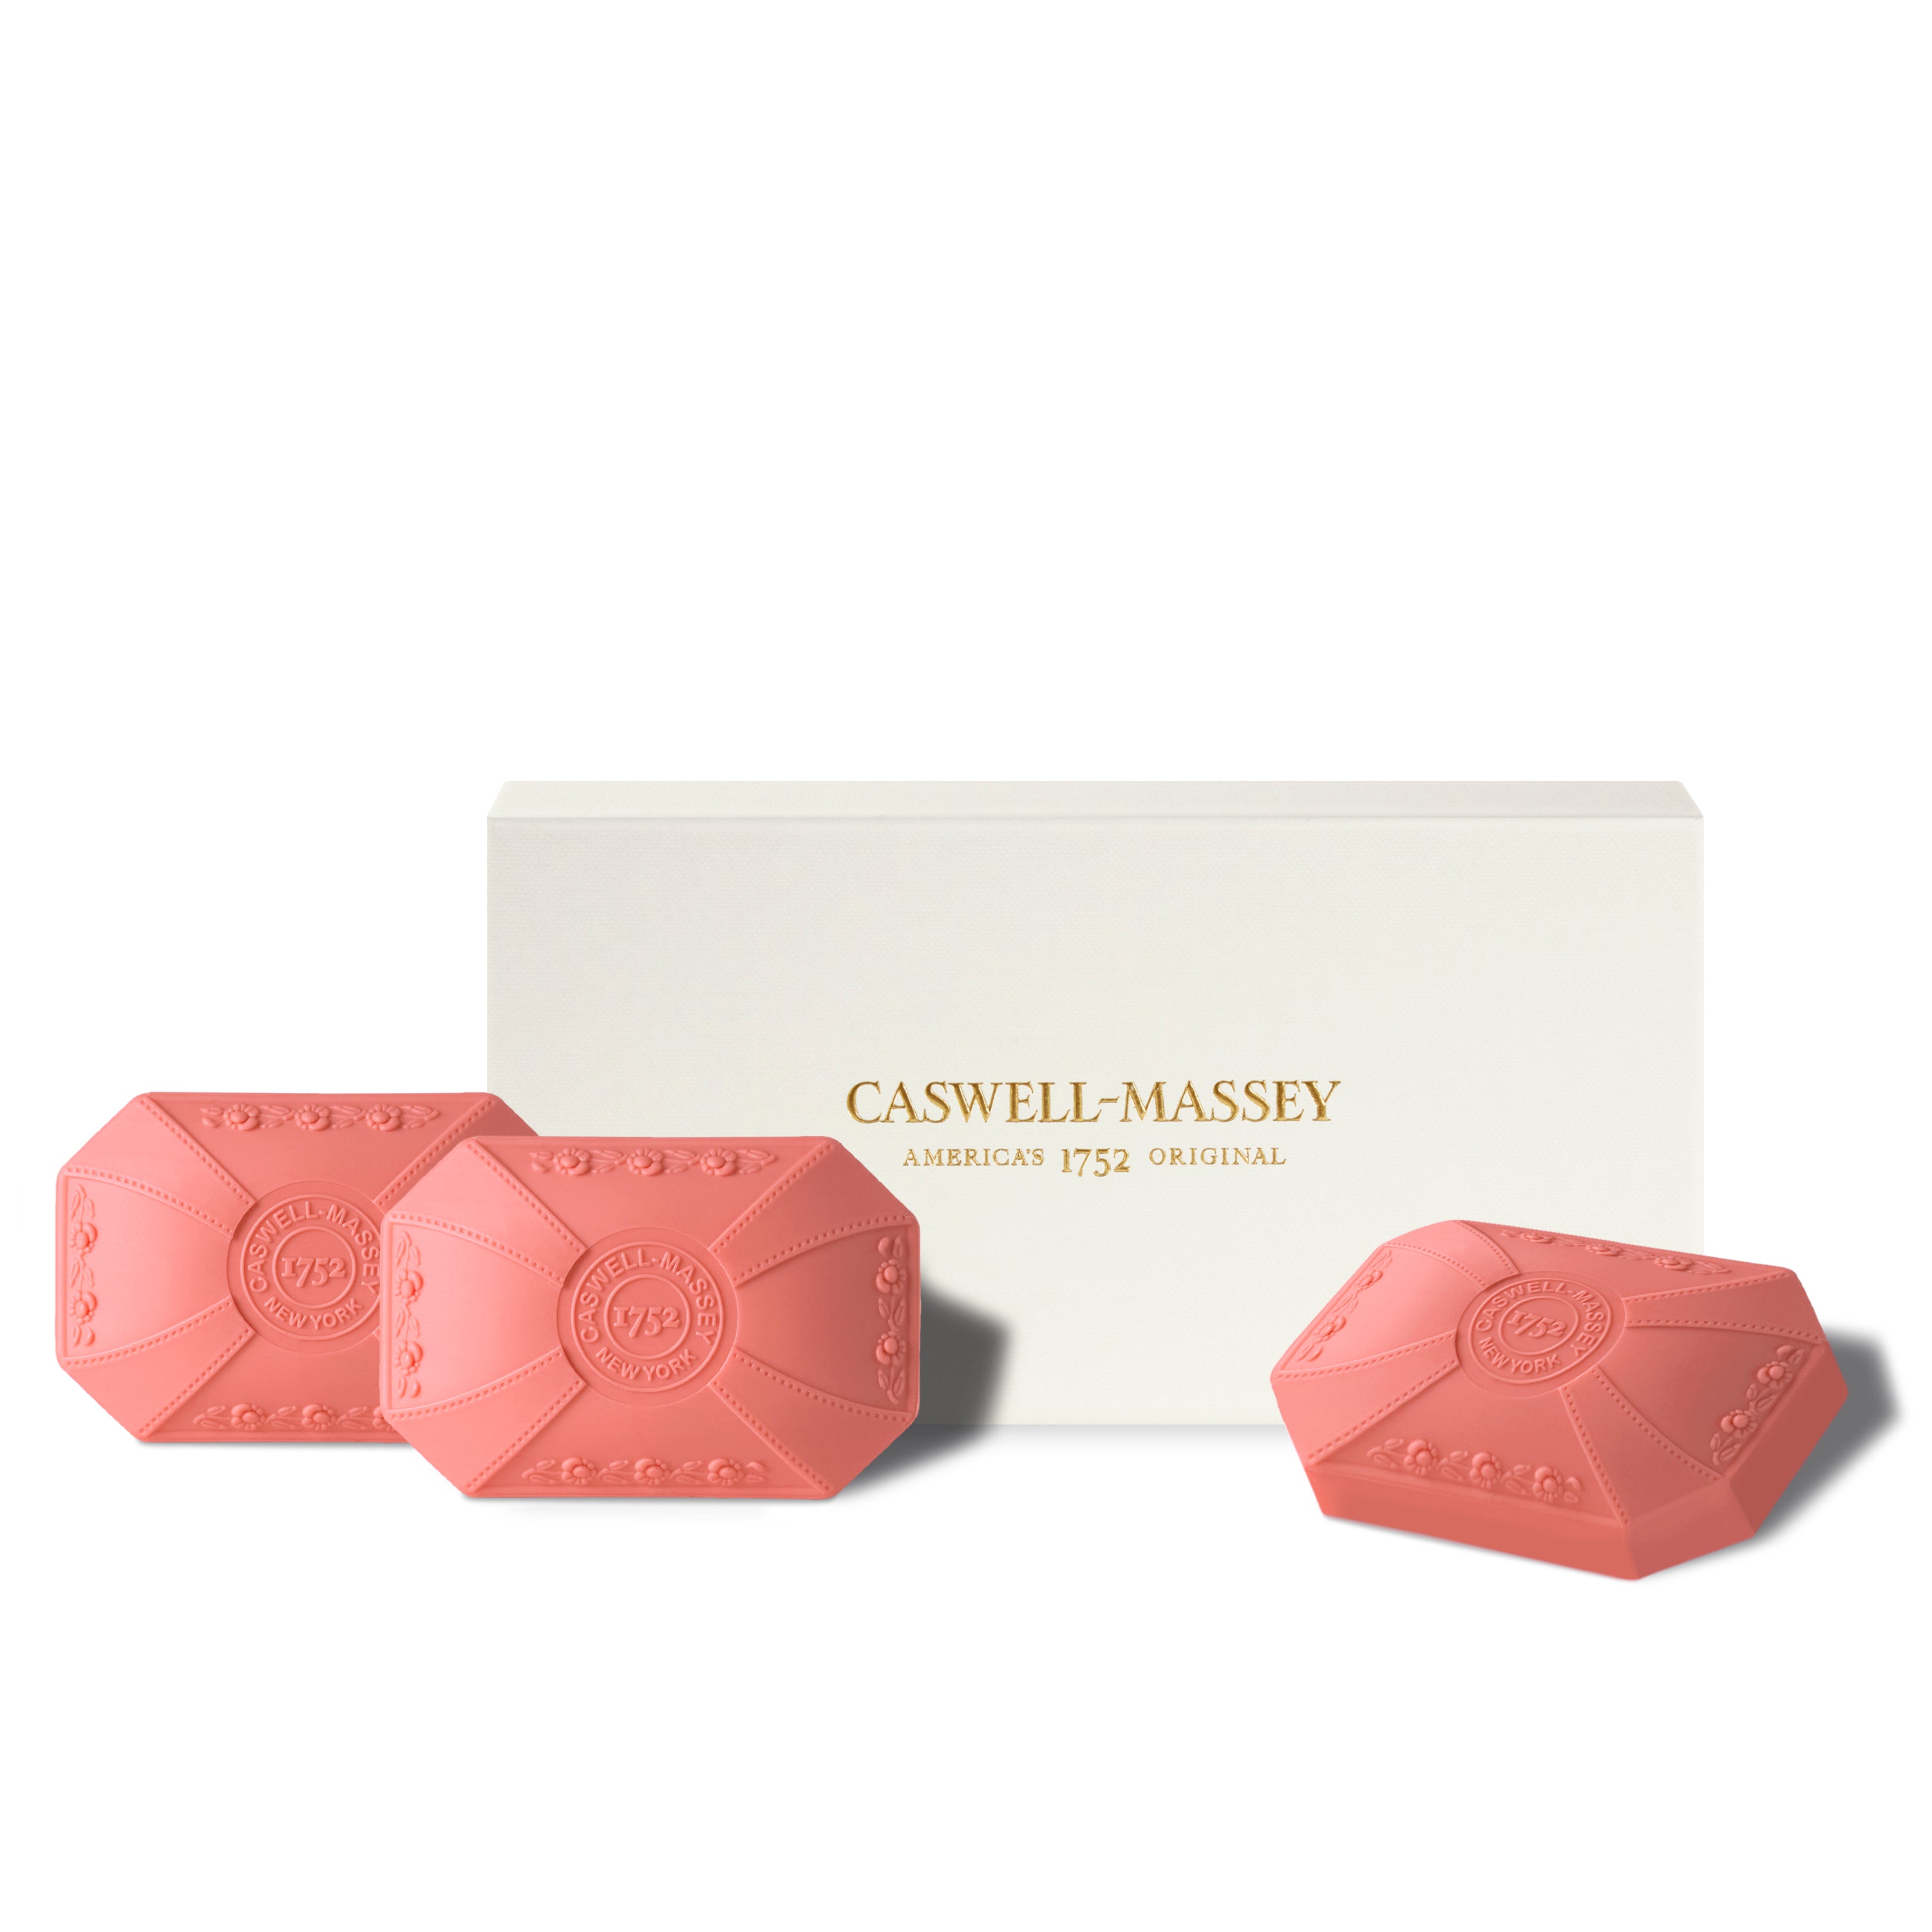 Caswell-Massey Honeysuckle Luxury 3-Soap Gift Set shown with gift box alongside pink decorative bath soaps